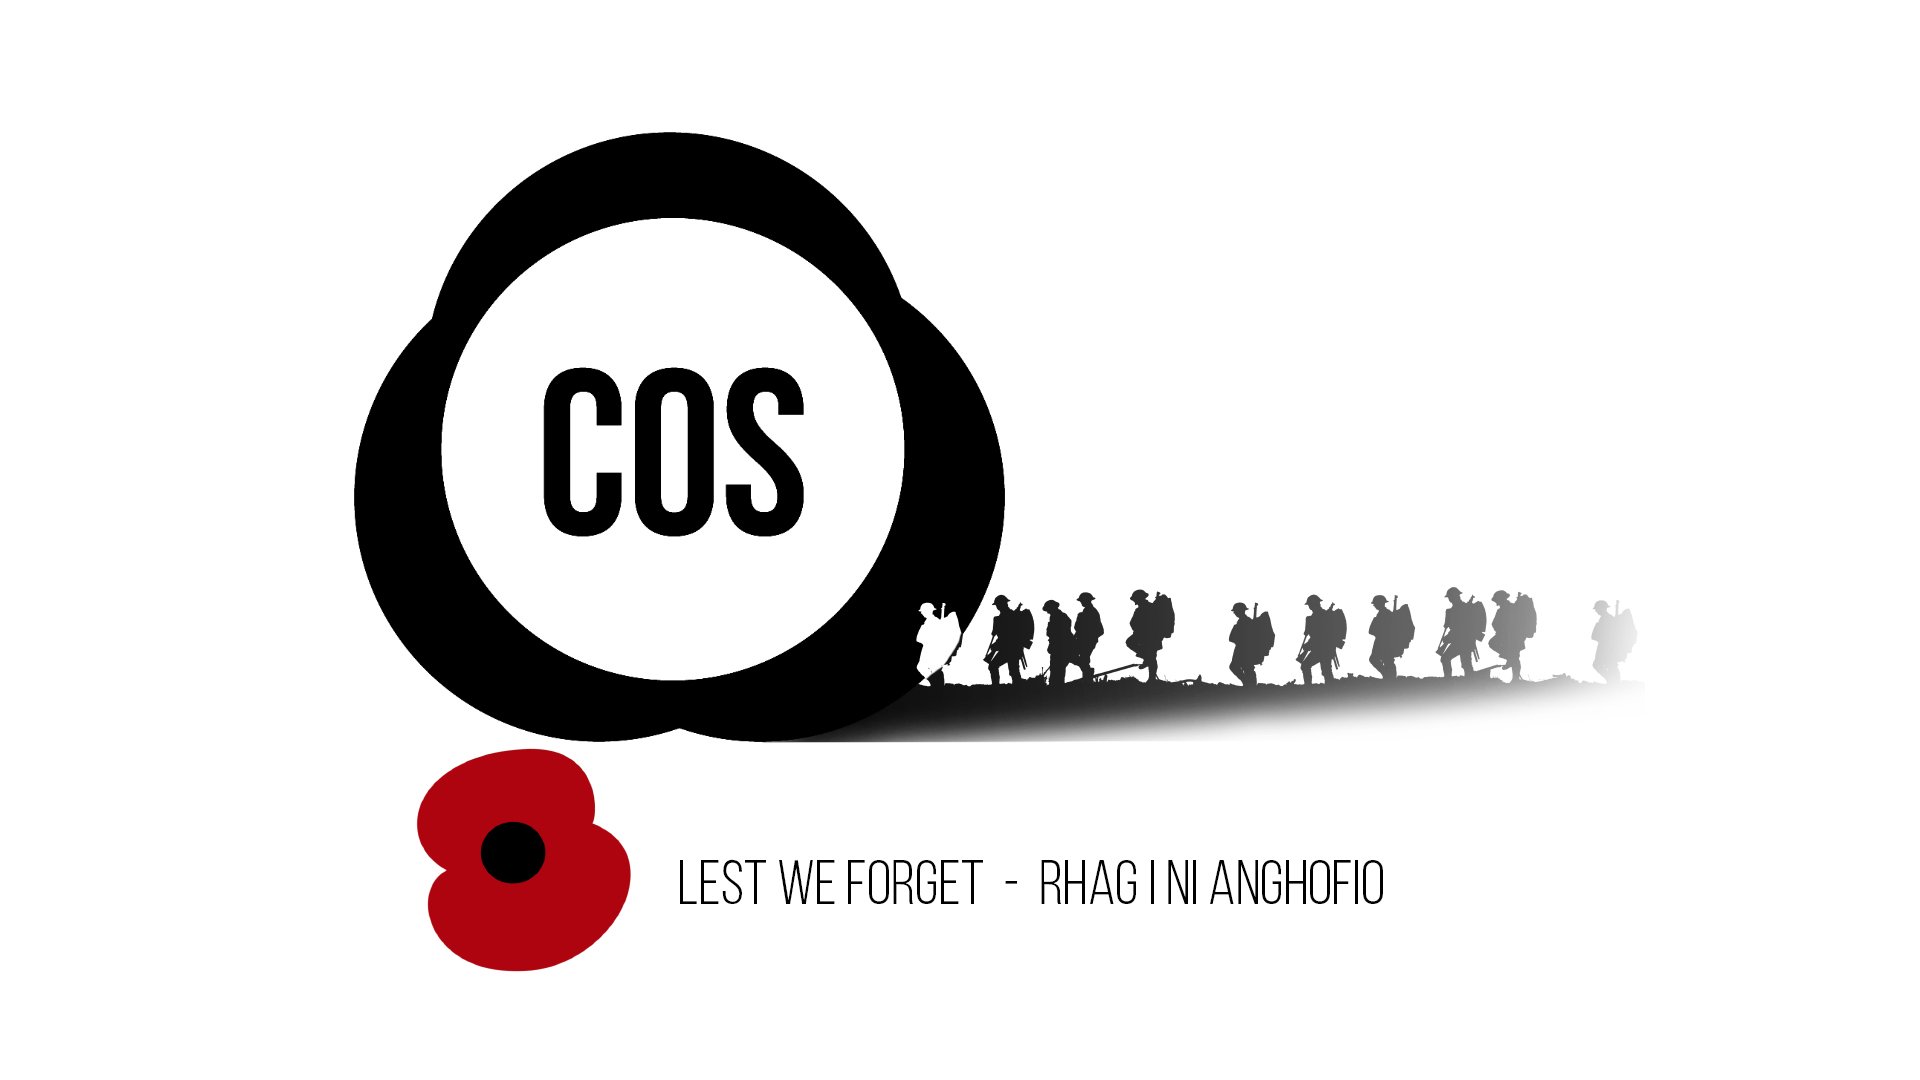 COS Remembers